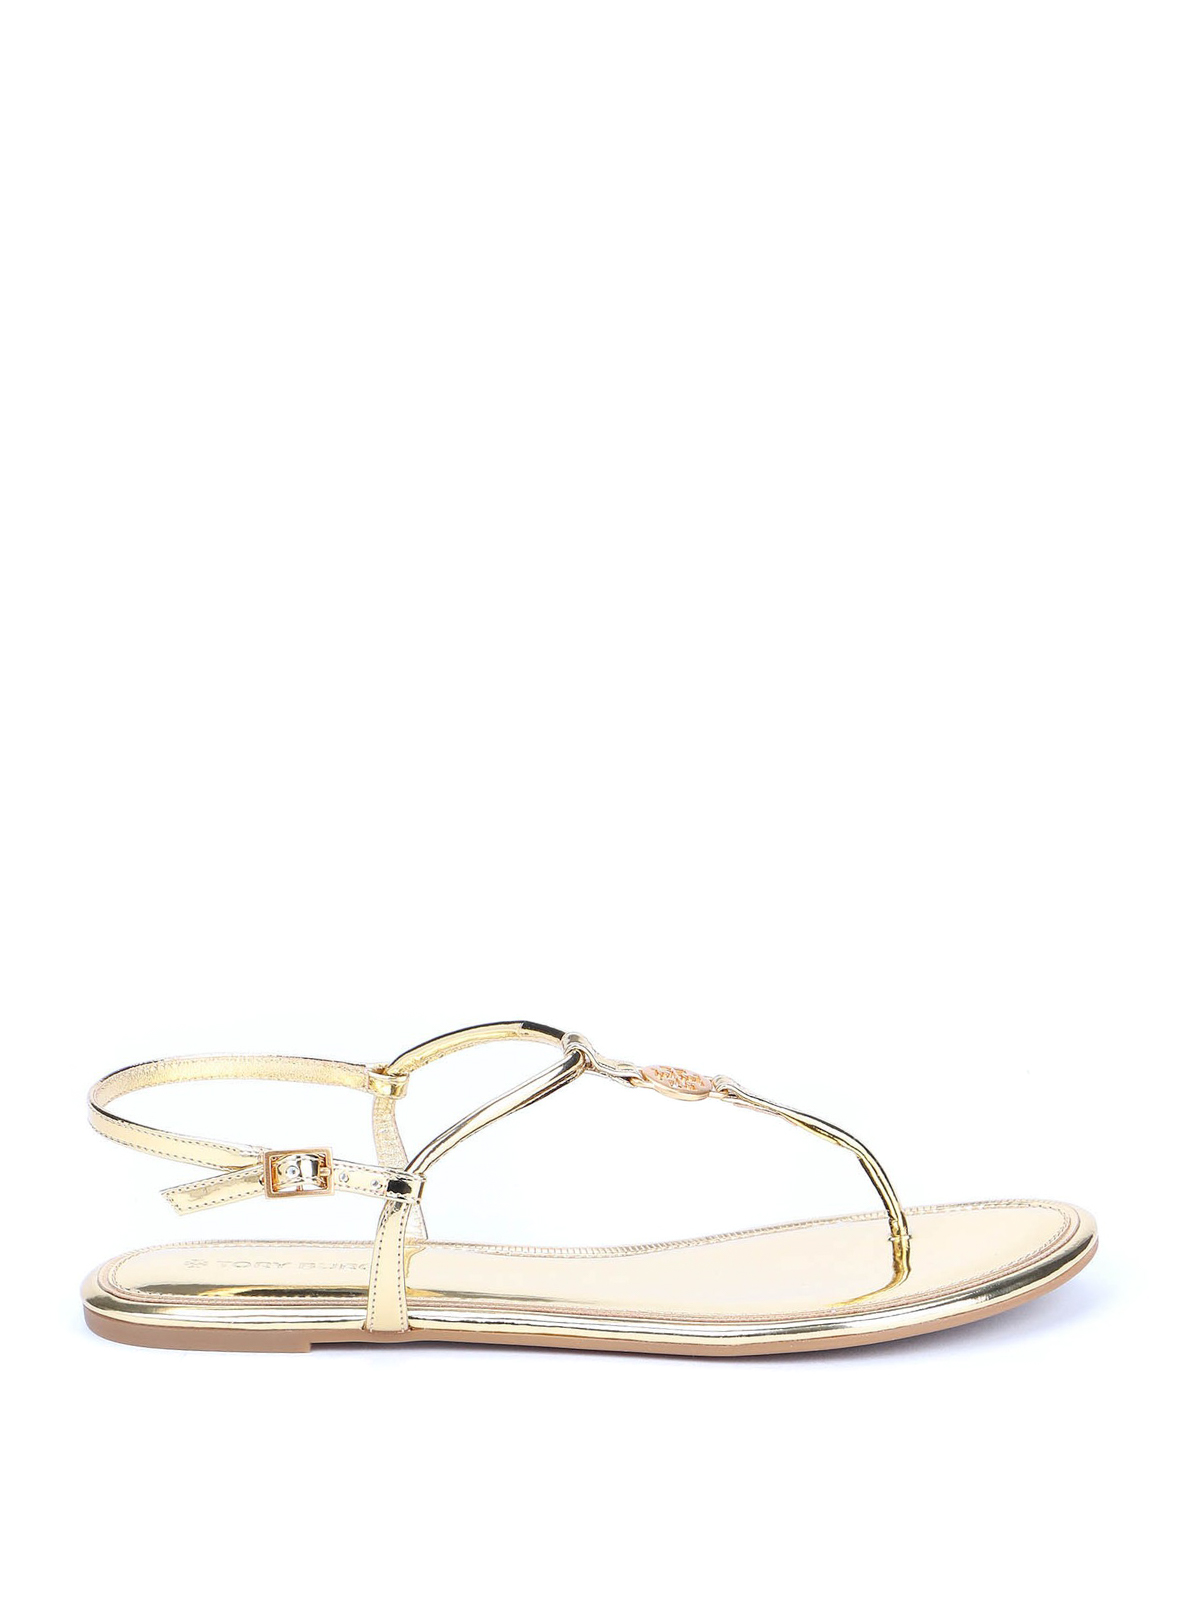 Sandals Tory Burch - Emmy metallic leather thong sandals - 65178701